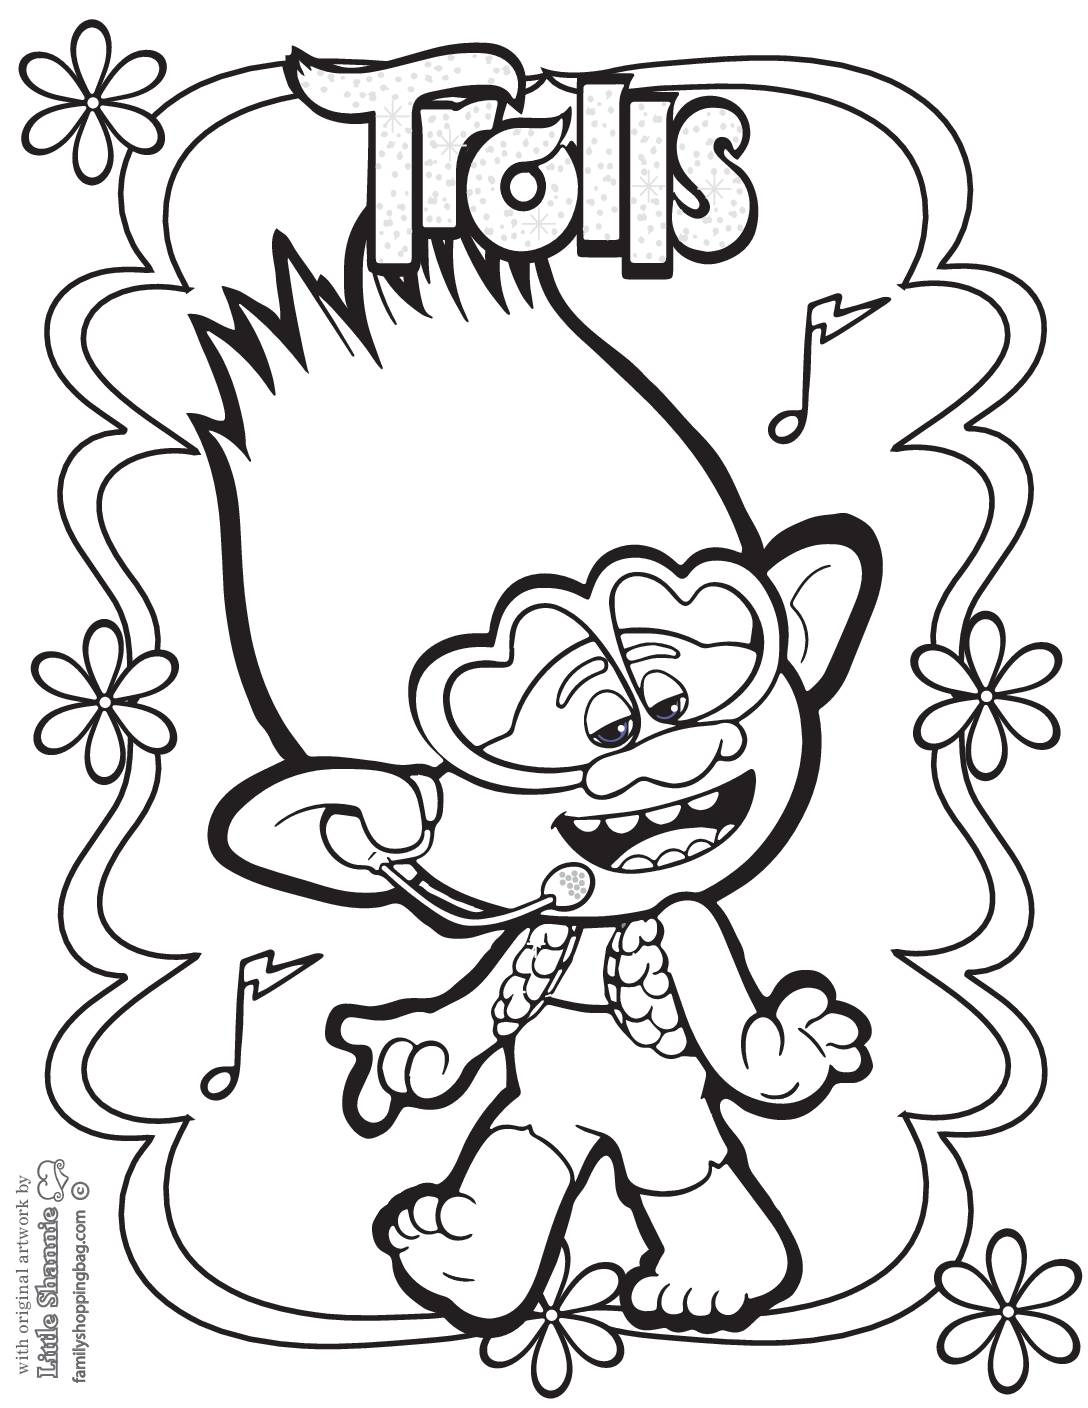 Coloring Page 4 Trolls Coloring Pages